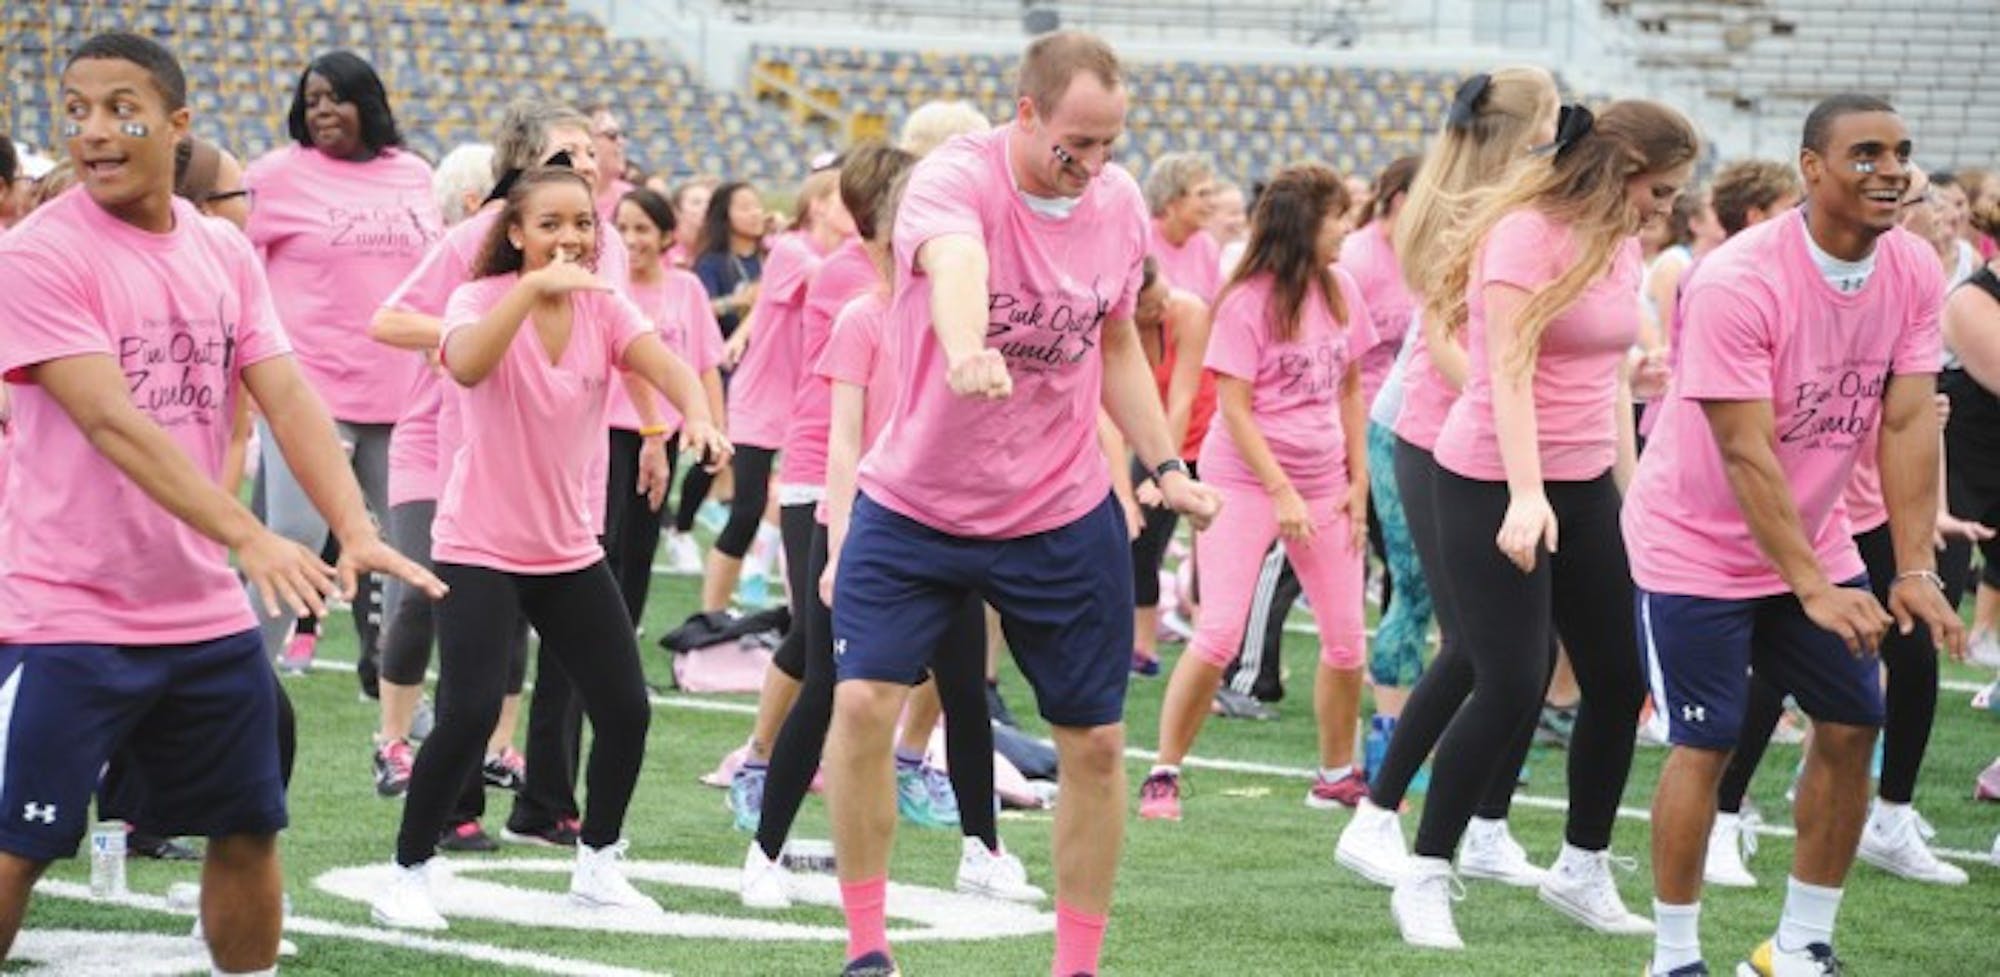 Pink Out Zumba participants take a Zumba class sponsored by the Kelly Cares Foundation, which aims to raise awareness about pertinent health and education issues.